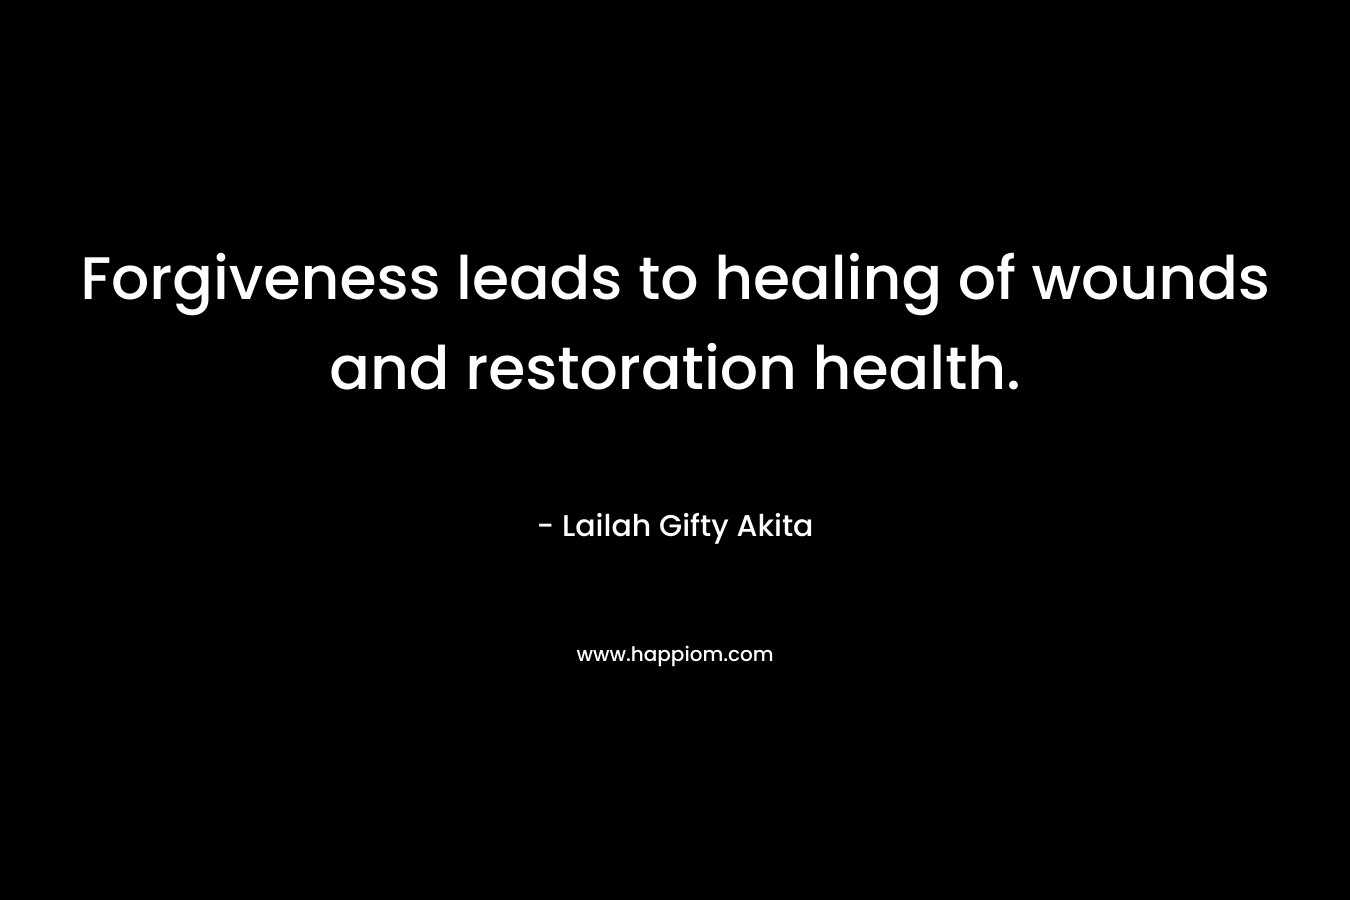 Forgiveness leads to healing of wounds and restoration health.